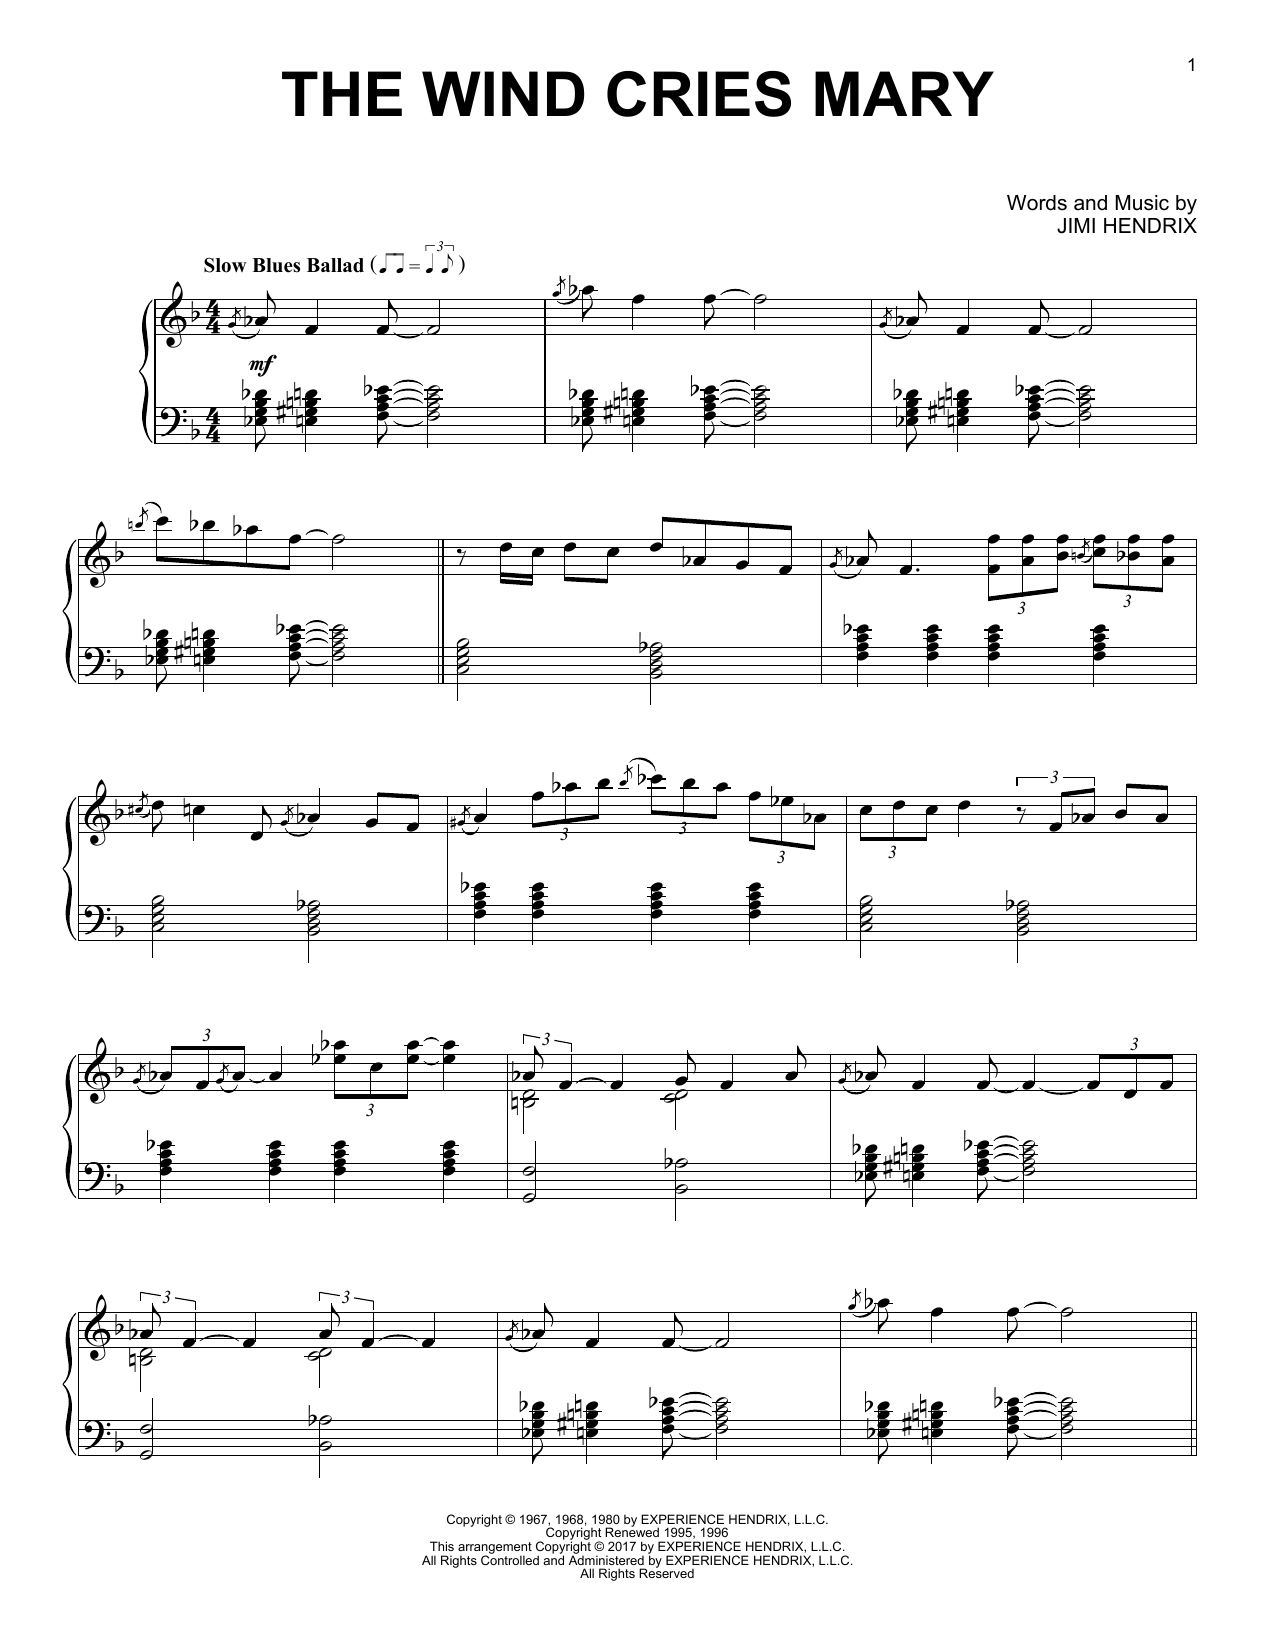 Download Jimi Hendrix The Wind Cries Mary [Jazz version] Sheet Music